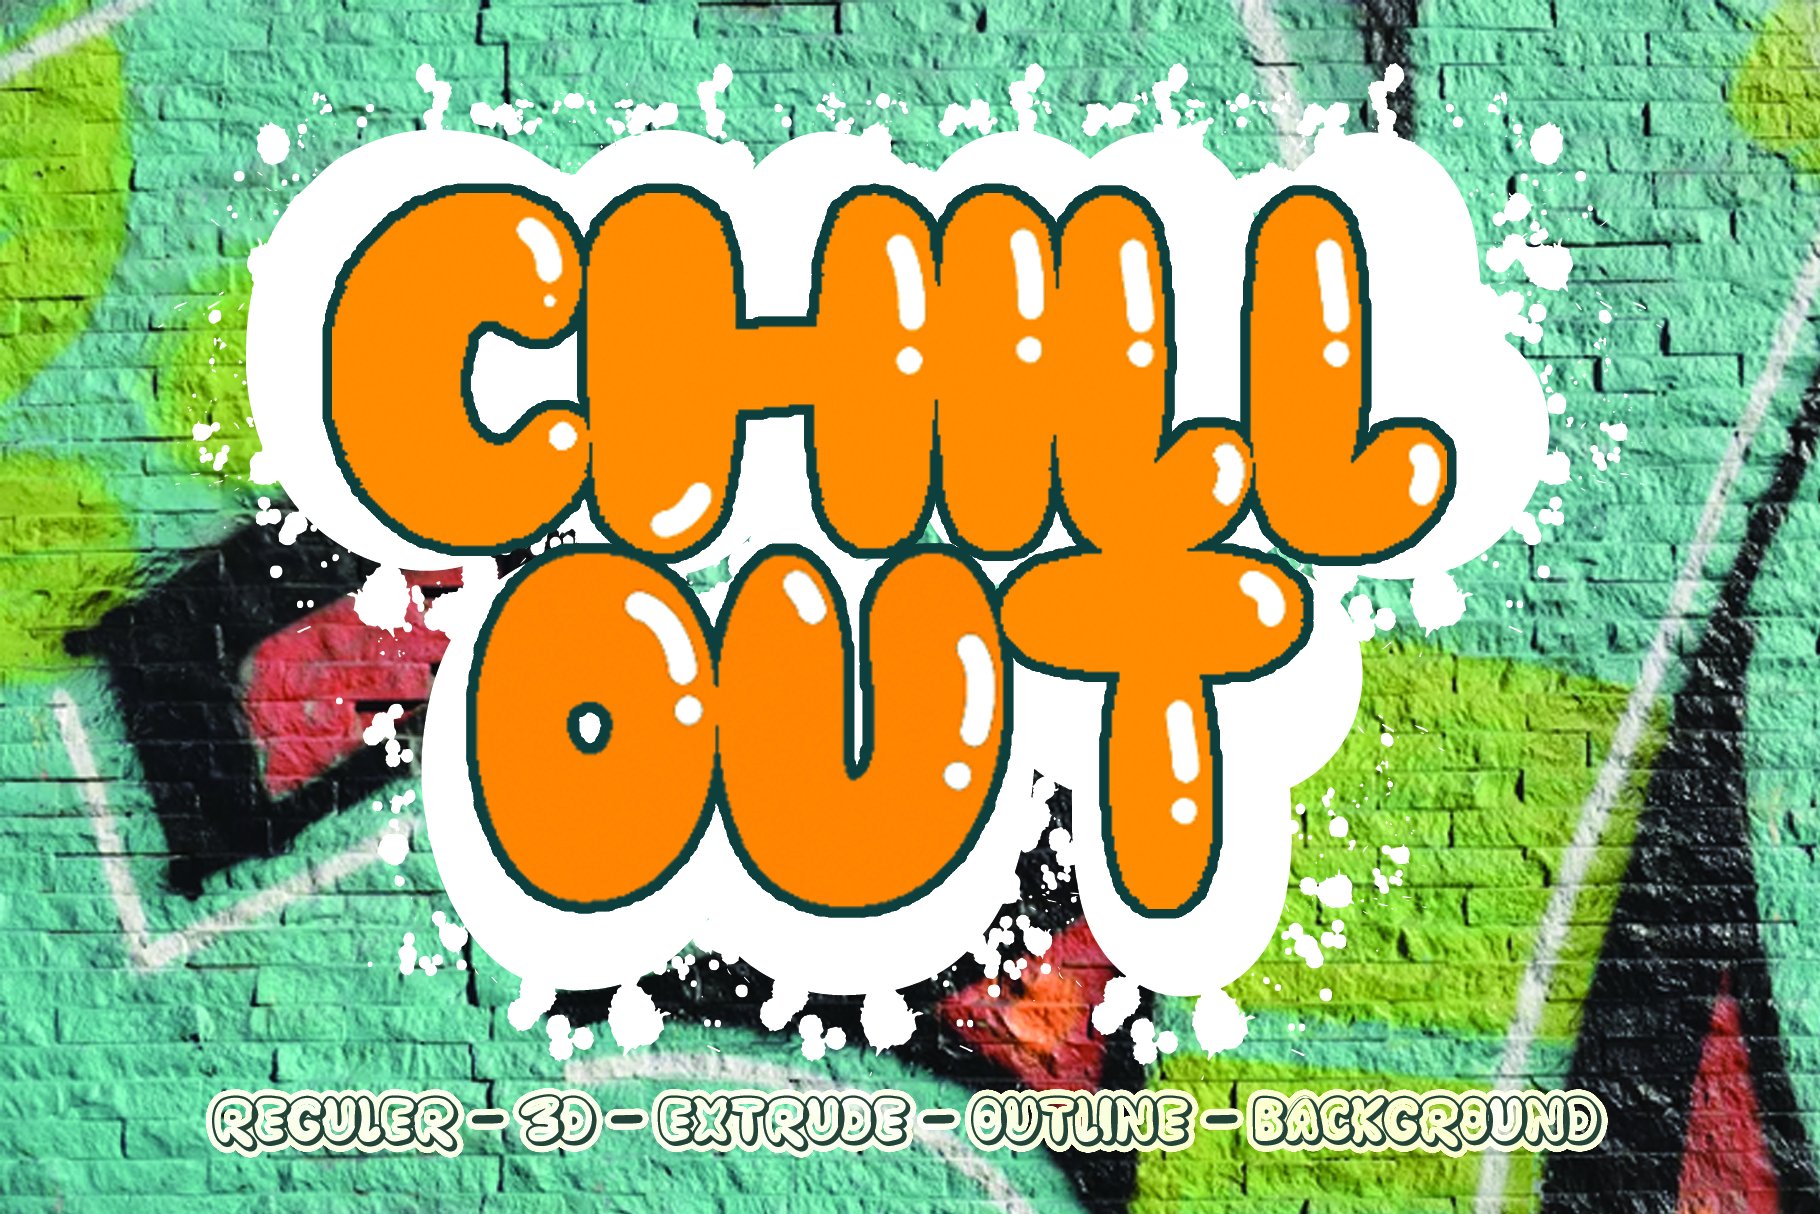 CHILLOUT - Display Font cover image.